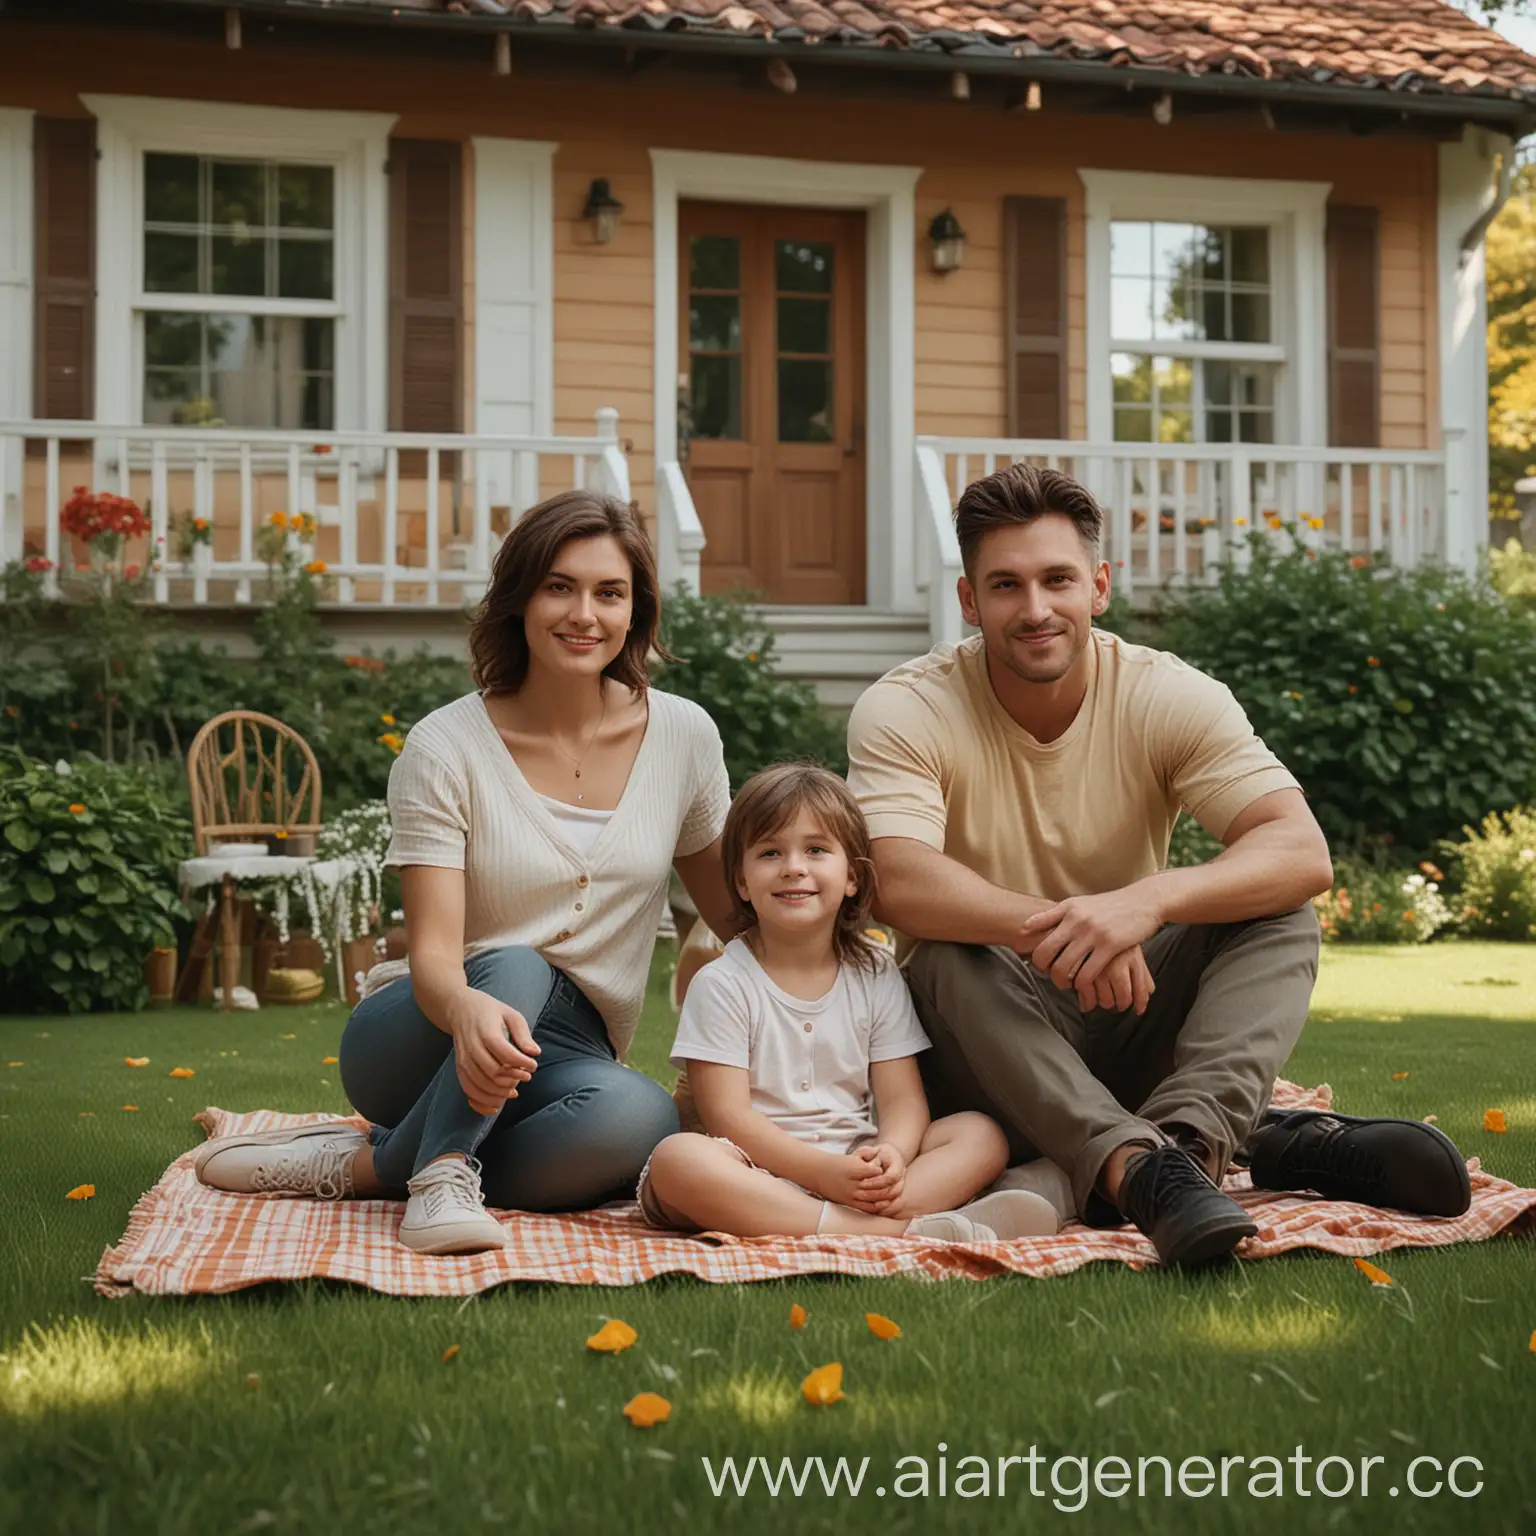 Happy-Family-Portrait-in-Front-of-Cottage-Natural-Light-and-Warm-Tones